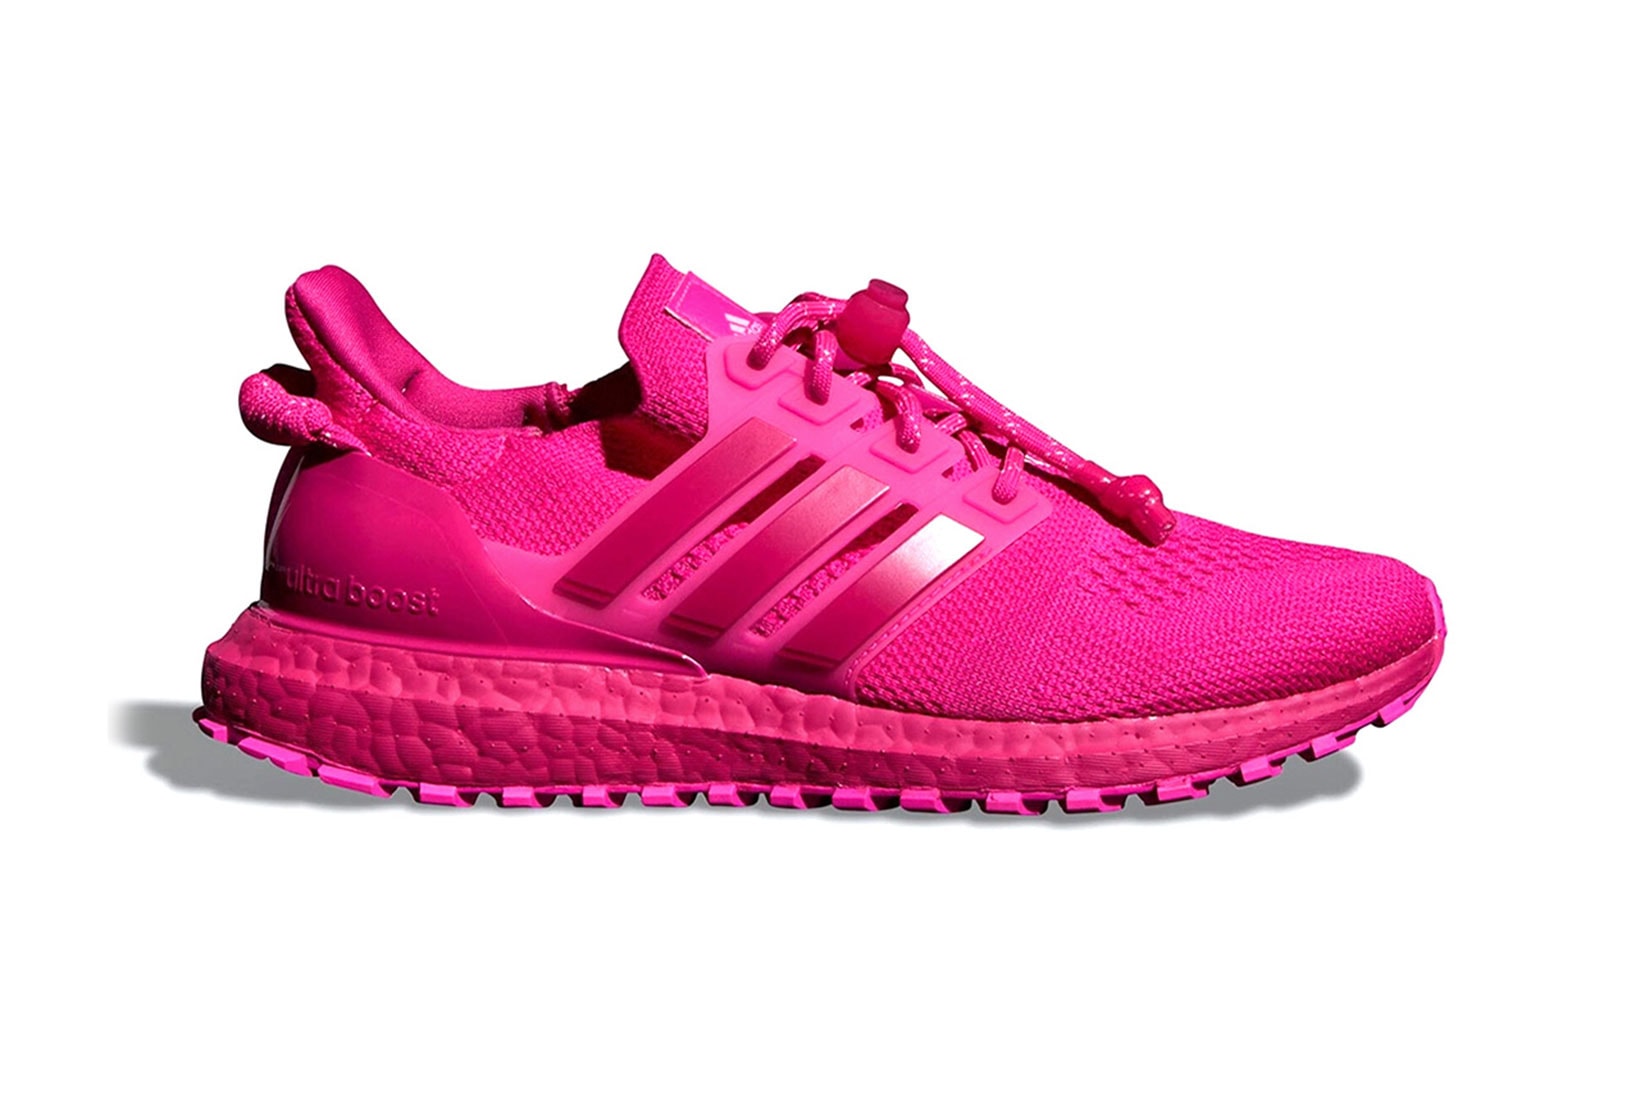 IVY PARK Beyonce adidas UltraBOOST Pink Sneakers Collaboration Release Price Info